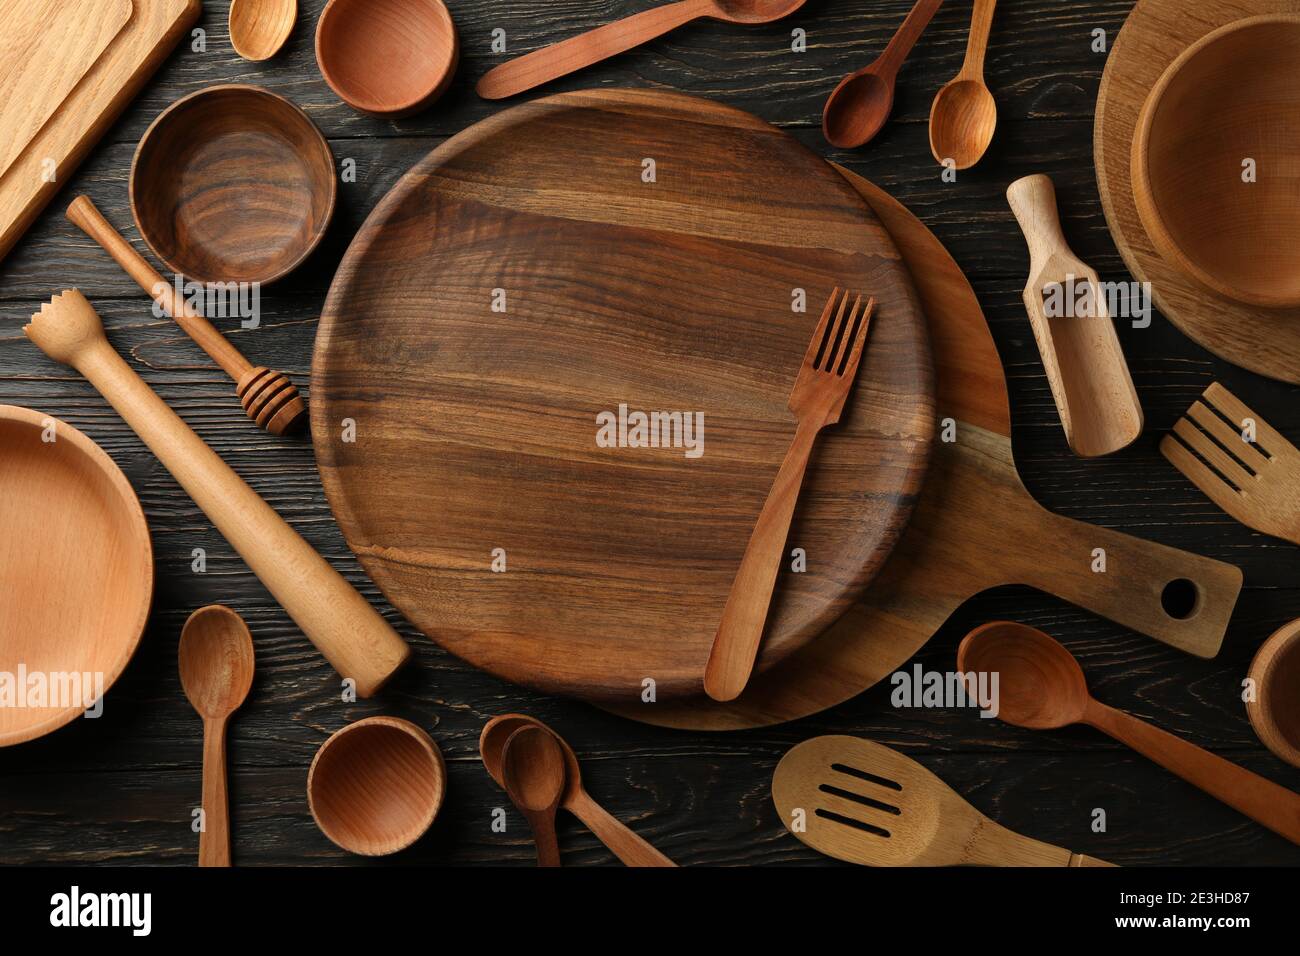 Different wooden kitchenware on wooden table, top view Stock Photo ...